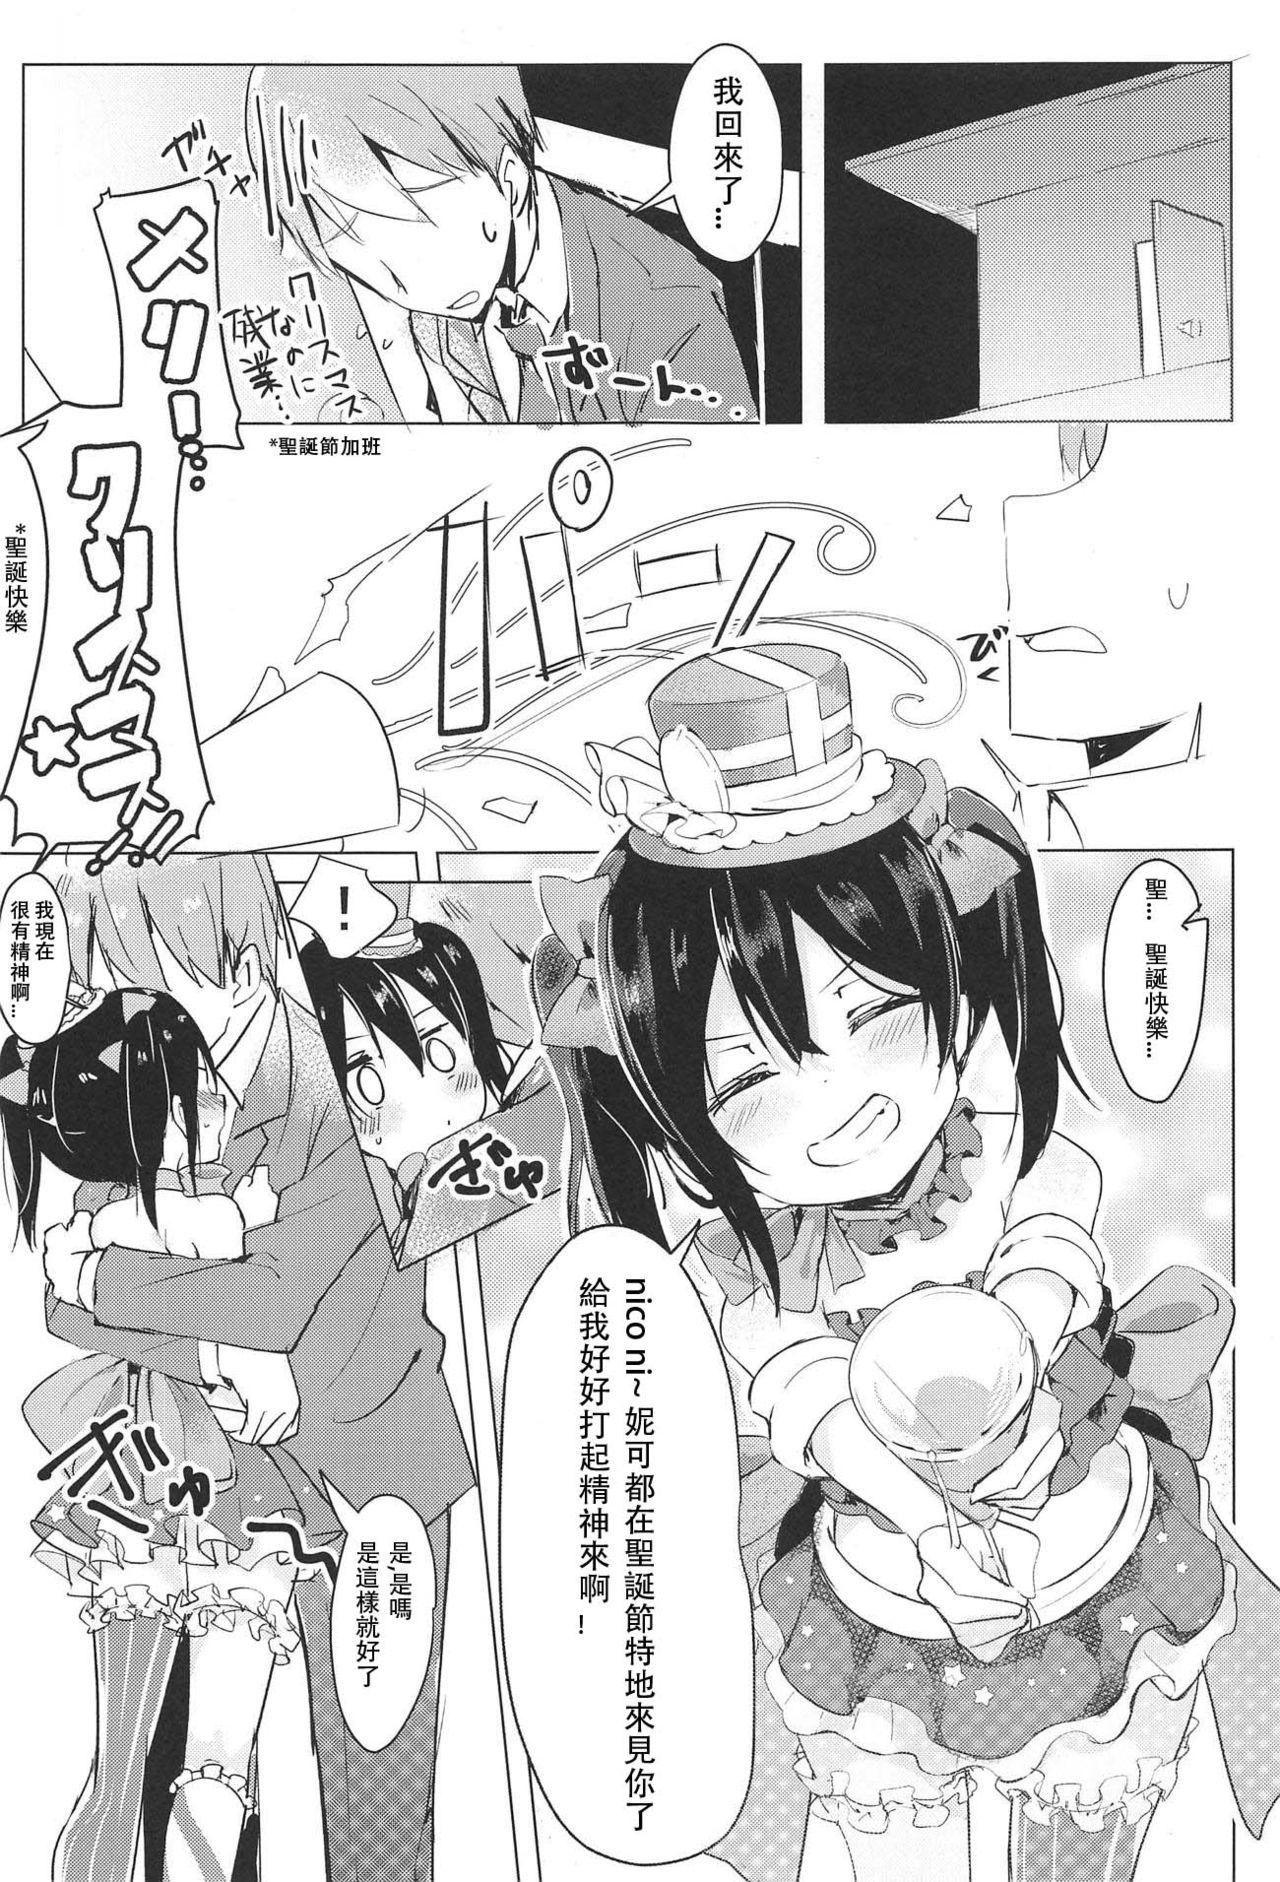 Scandal Smile for you. - Love live Gay Pawnshop - Page 3